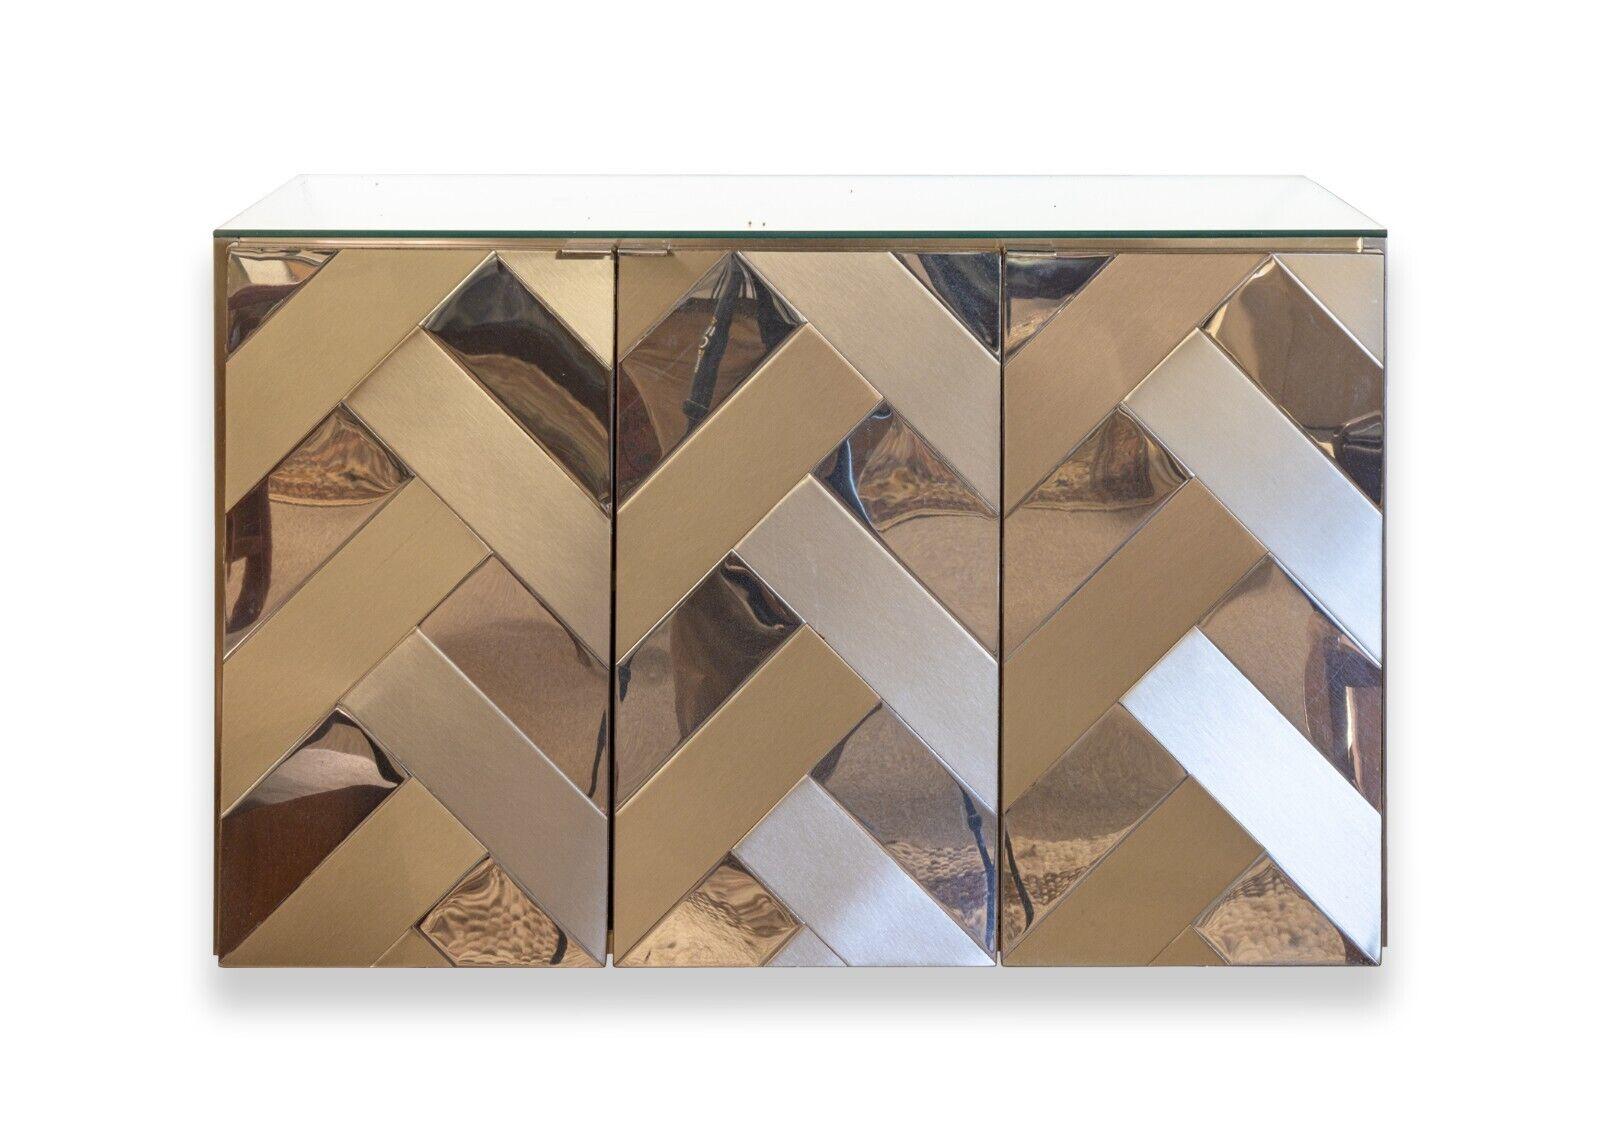 A contemporary modern pair of Ello chevron mirrored wall mounted cabinets. A stunning set of floating wall cabinets from Ello furniture. This pair of wall cabinets feature a clean glass top, 3 doors each, and adjustable shelving within each cabinet.